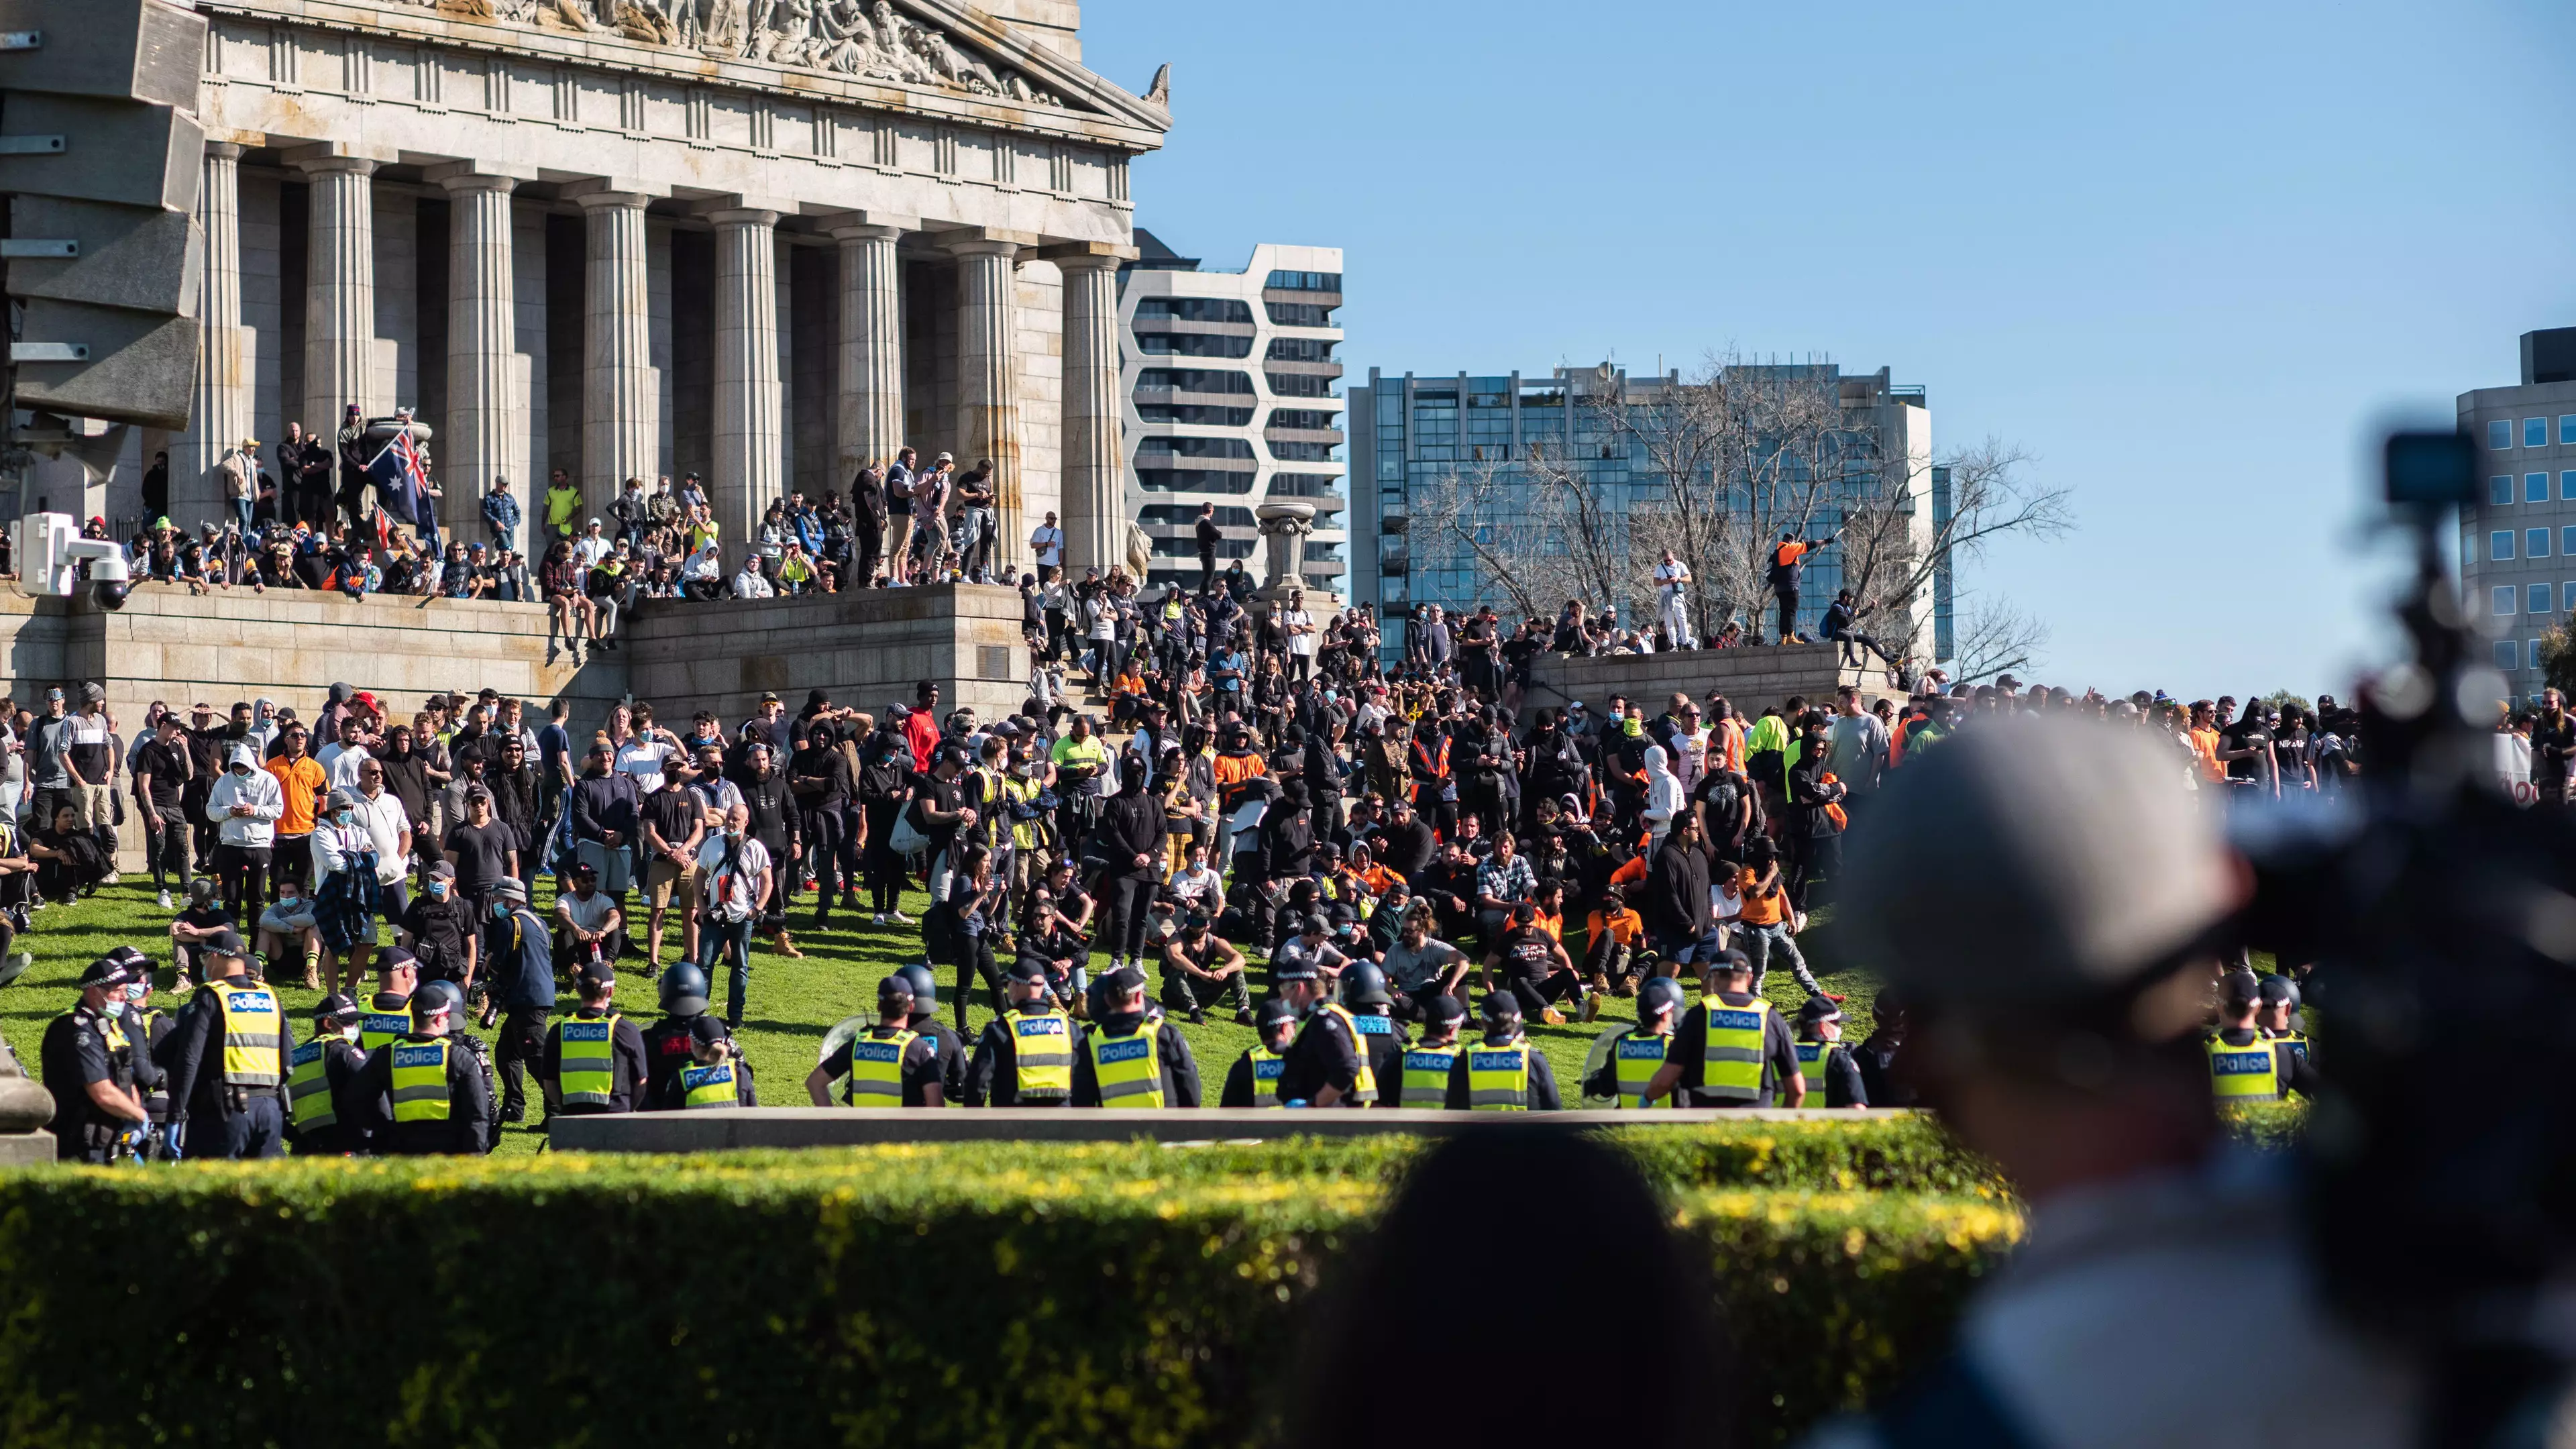 Melbourne Protestors Urinated On The Shrine Of Remembrance And 'Spat' On Vaccine Workers